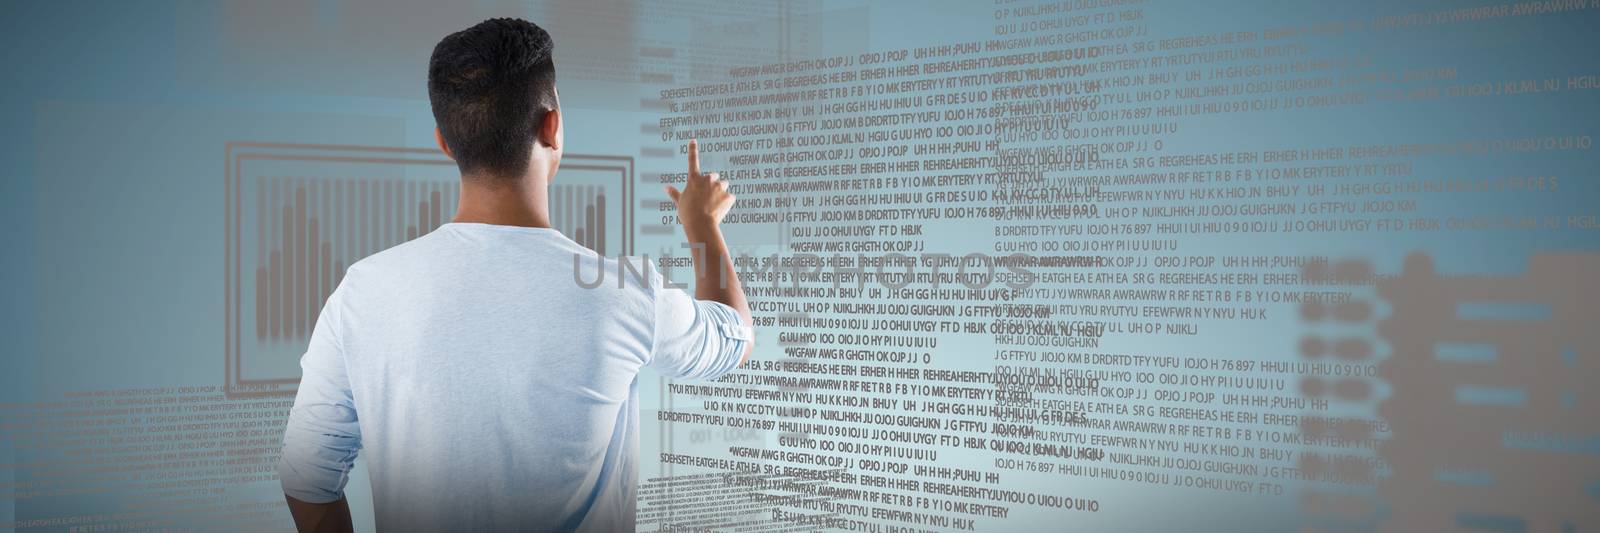 Composite image of man pretending to touch an invisible screen against white background by Wavebreakmedia